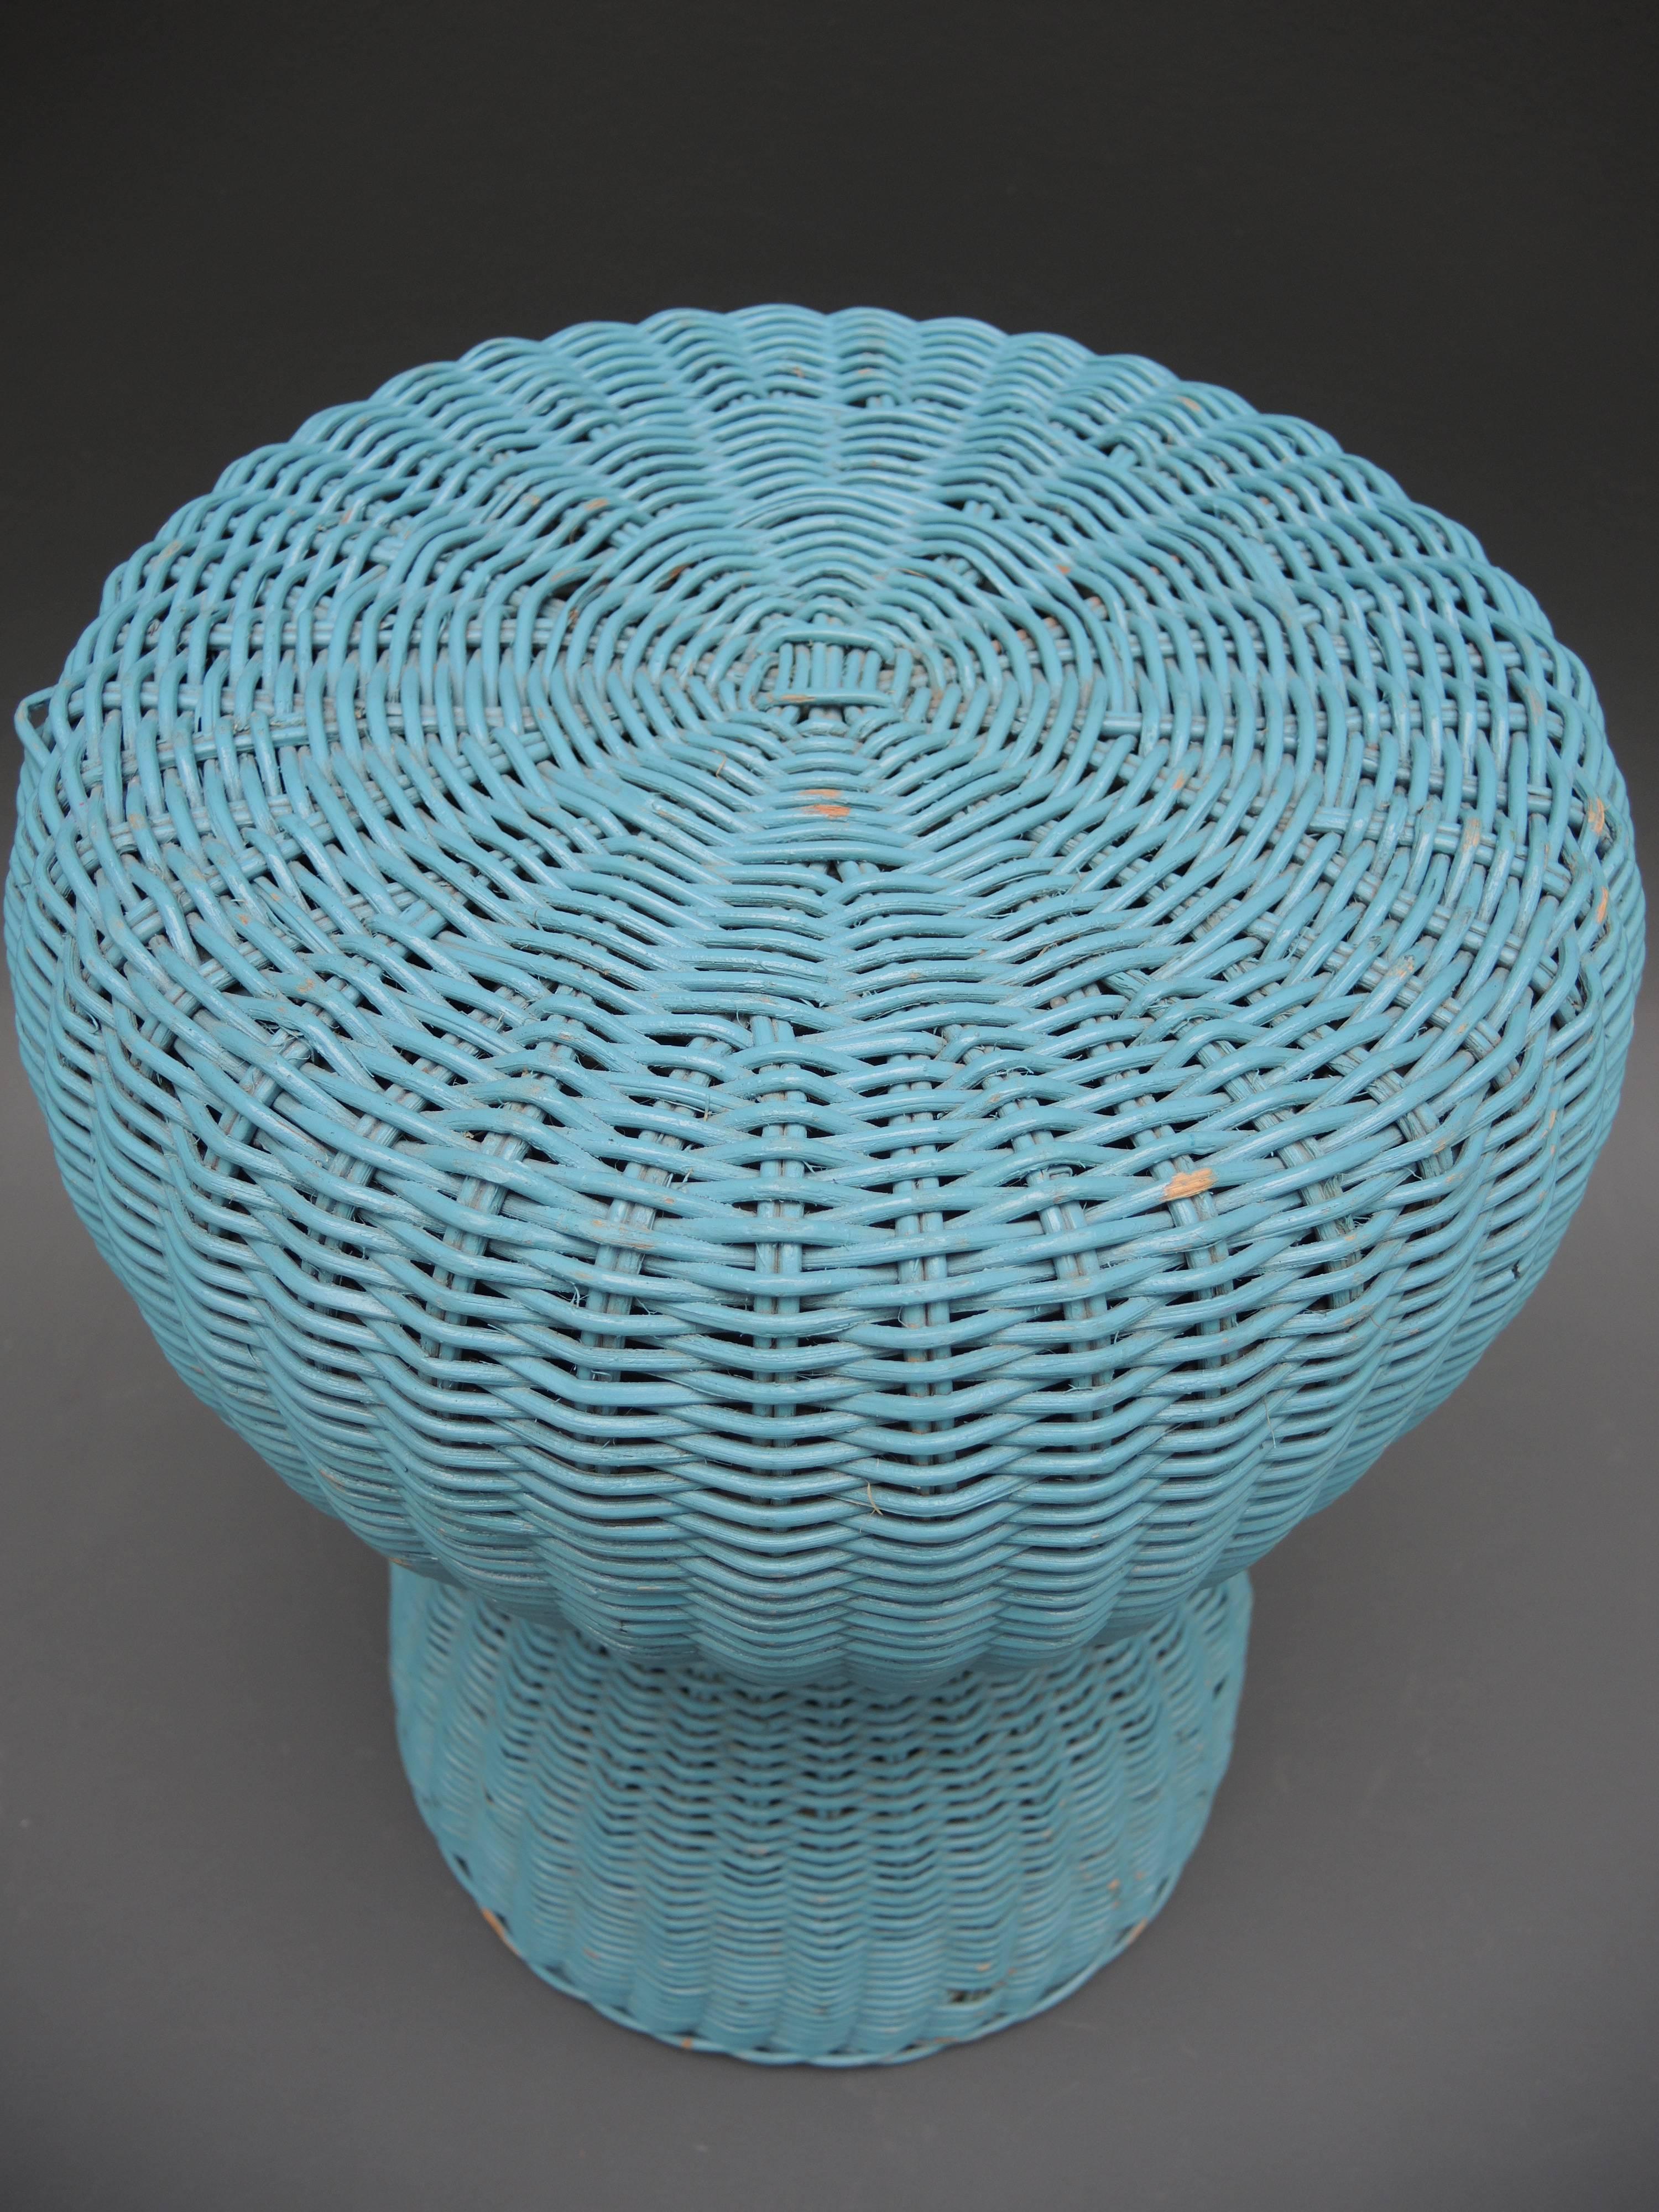 Very cool vintage French woven wicker side table retaining the original blue paint.
The size makes this the perfect piece to have around to use as a side table or as a stool when an extra seat is needed.